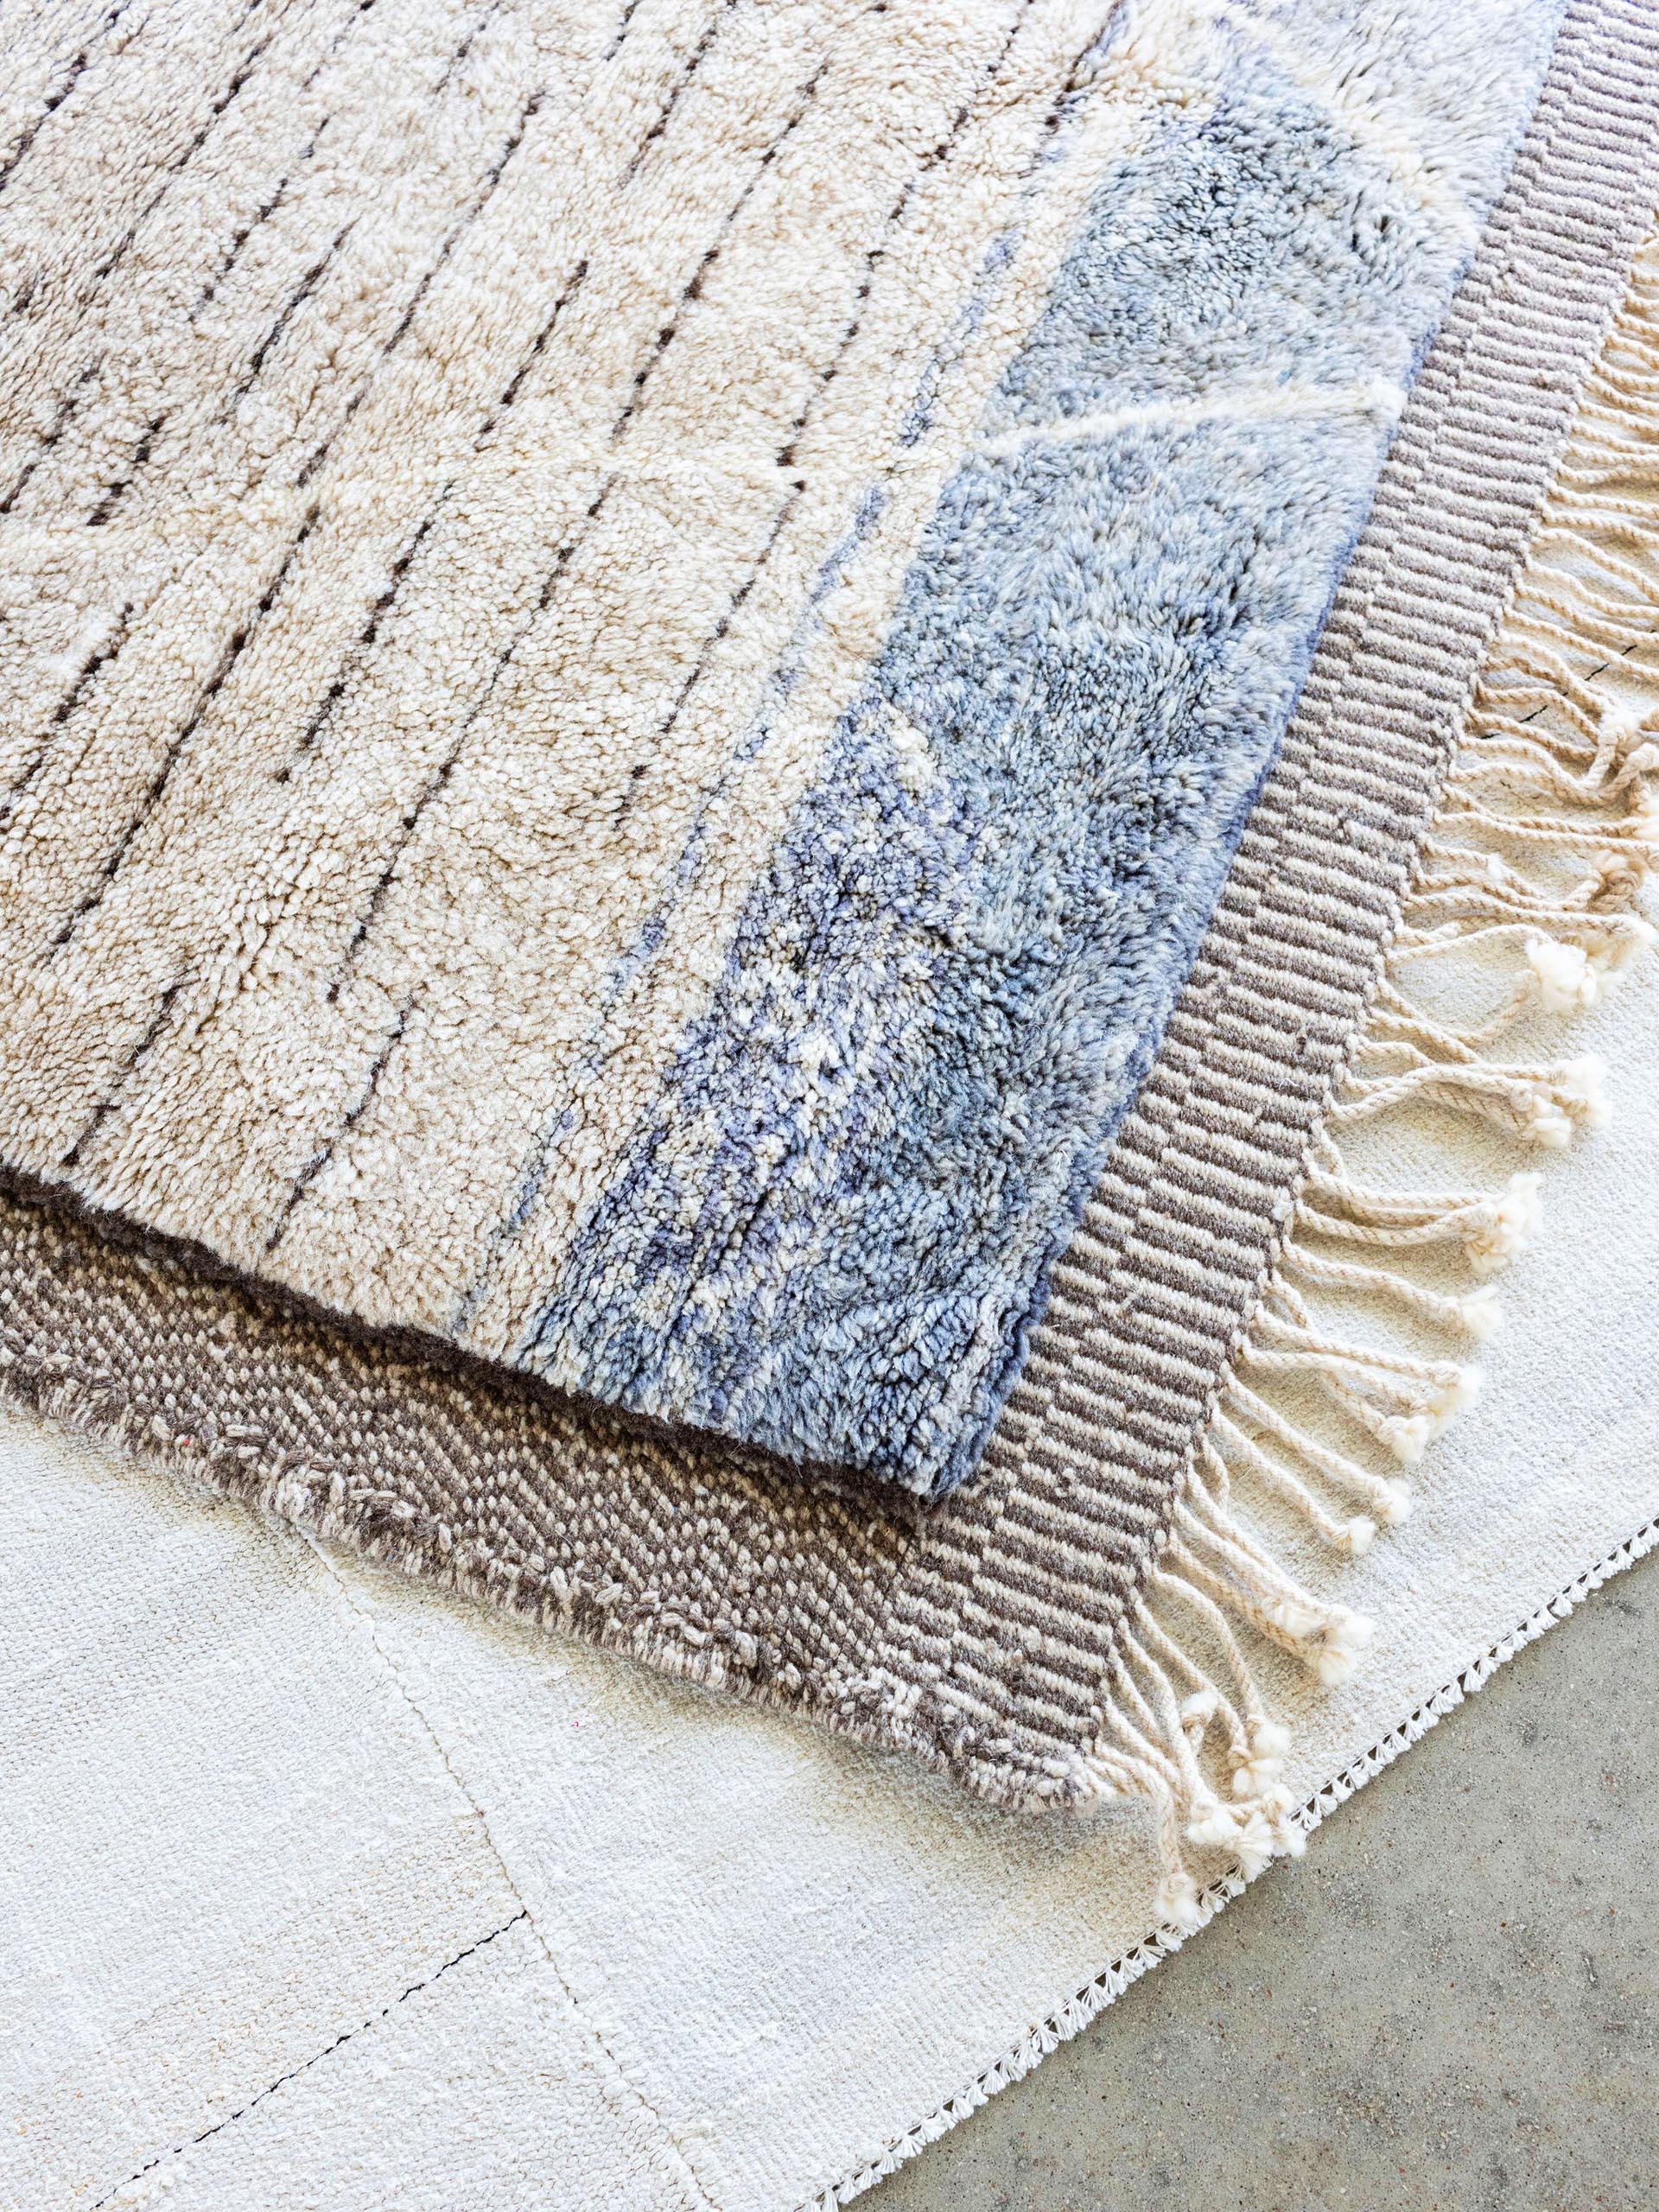 A one-of-a-kind plush rug made of the finest sheep’s wool from New Zealand, hand woven by the women of the Beni M’rirt tribe of Morocco. A pure and extra-virgin material, New Zealand wool is considered the pinnacle in quality, offering unparalleled